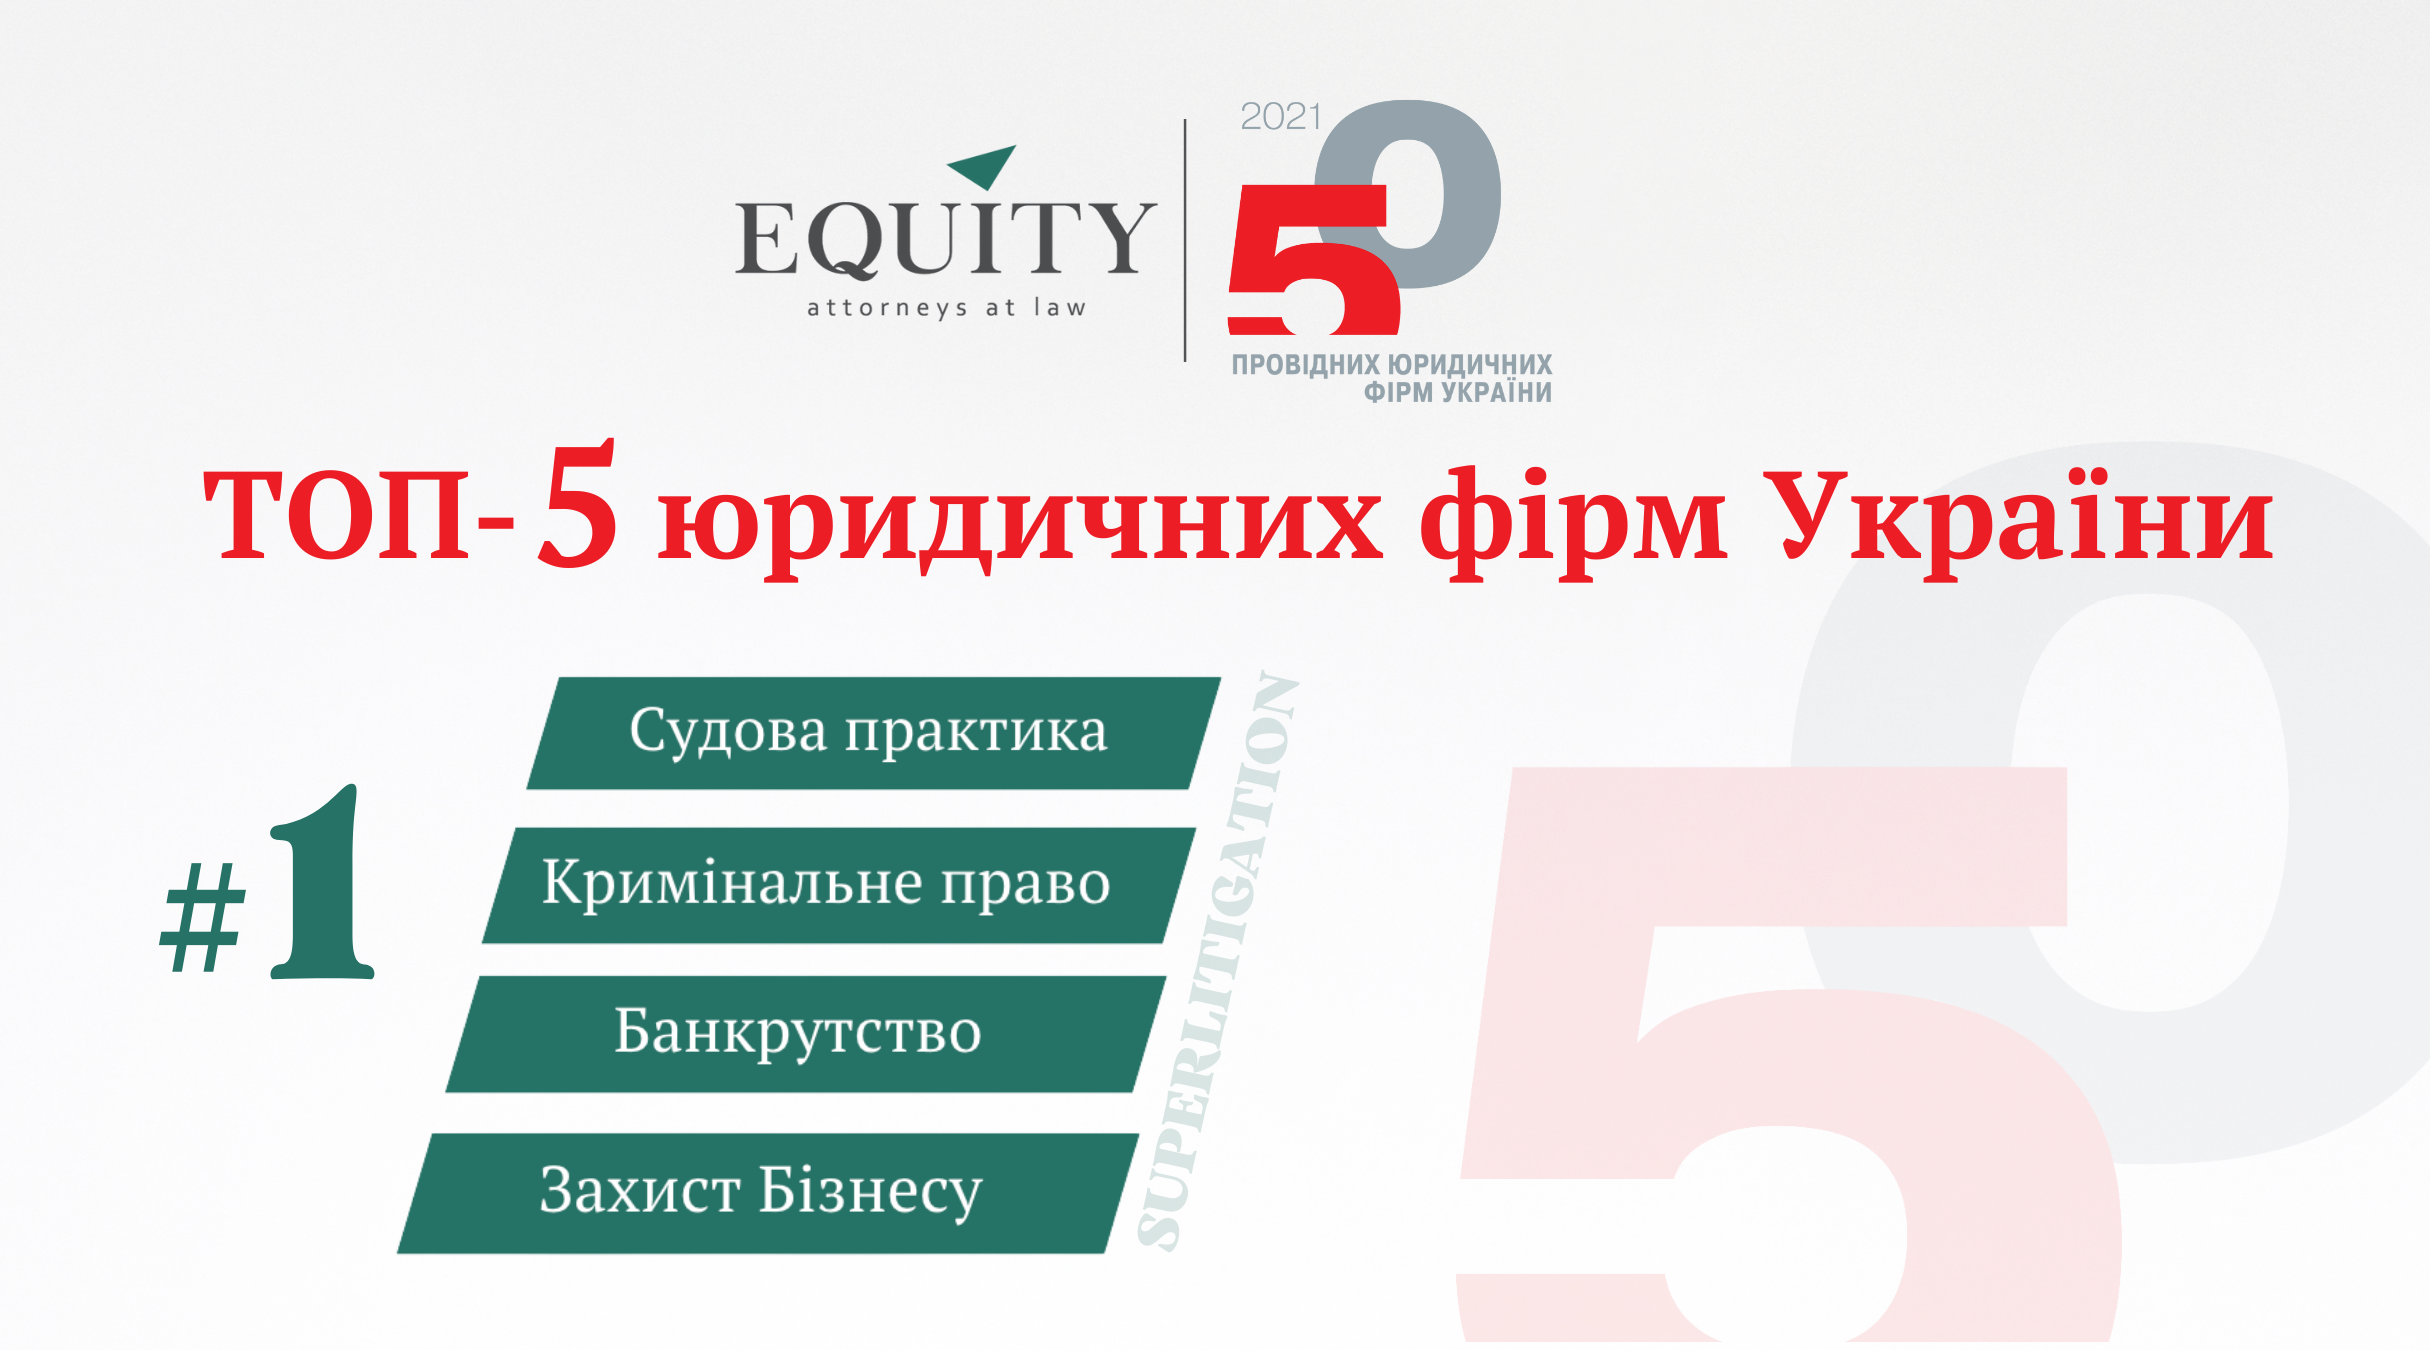 EQUITY is in The TOP-5 leading law firms of Ukraine 2021 according to Yuridicheskaya Praktika directory!